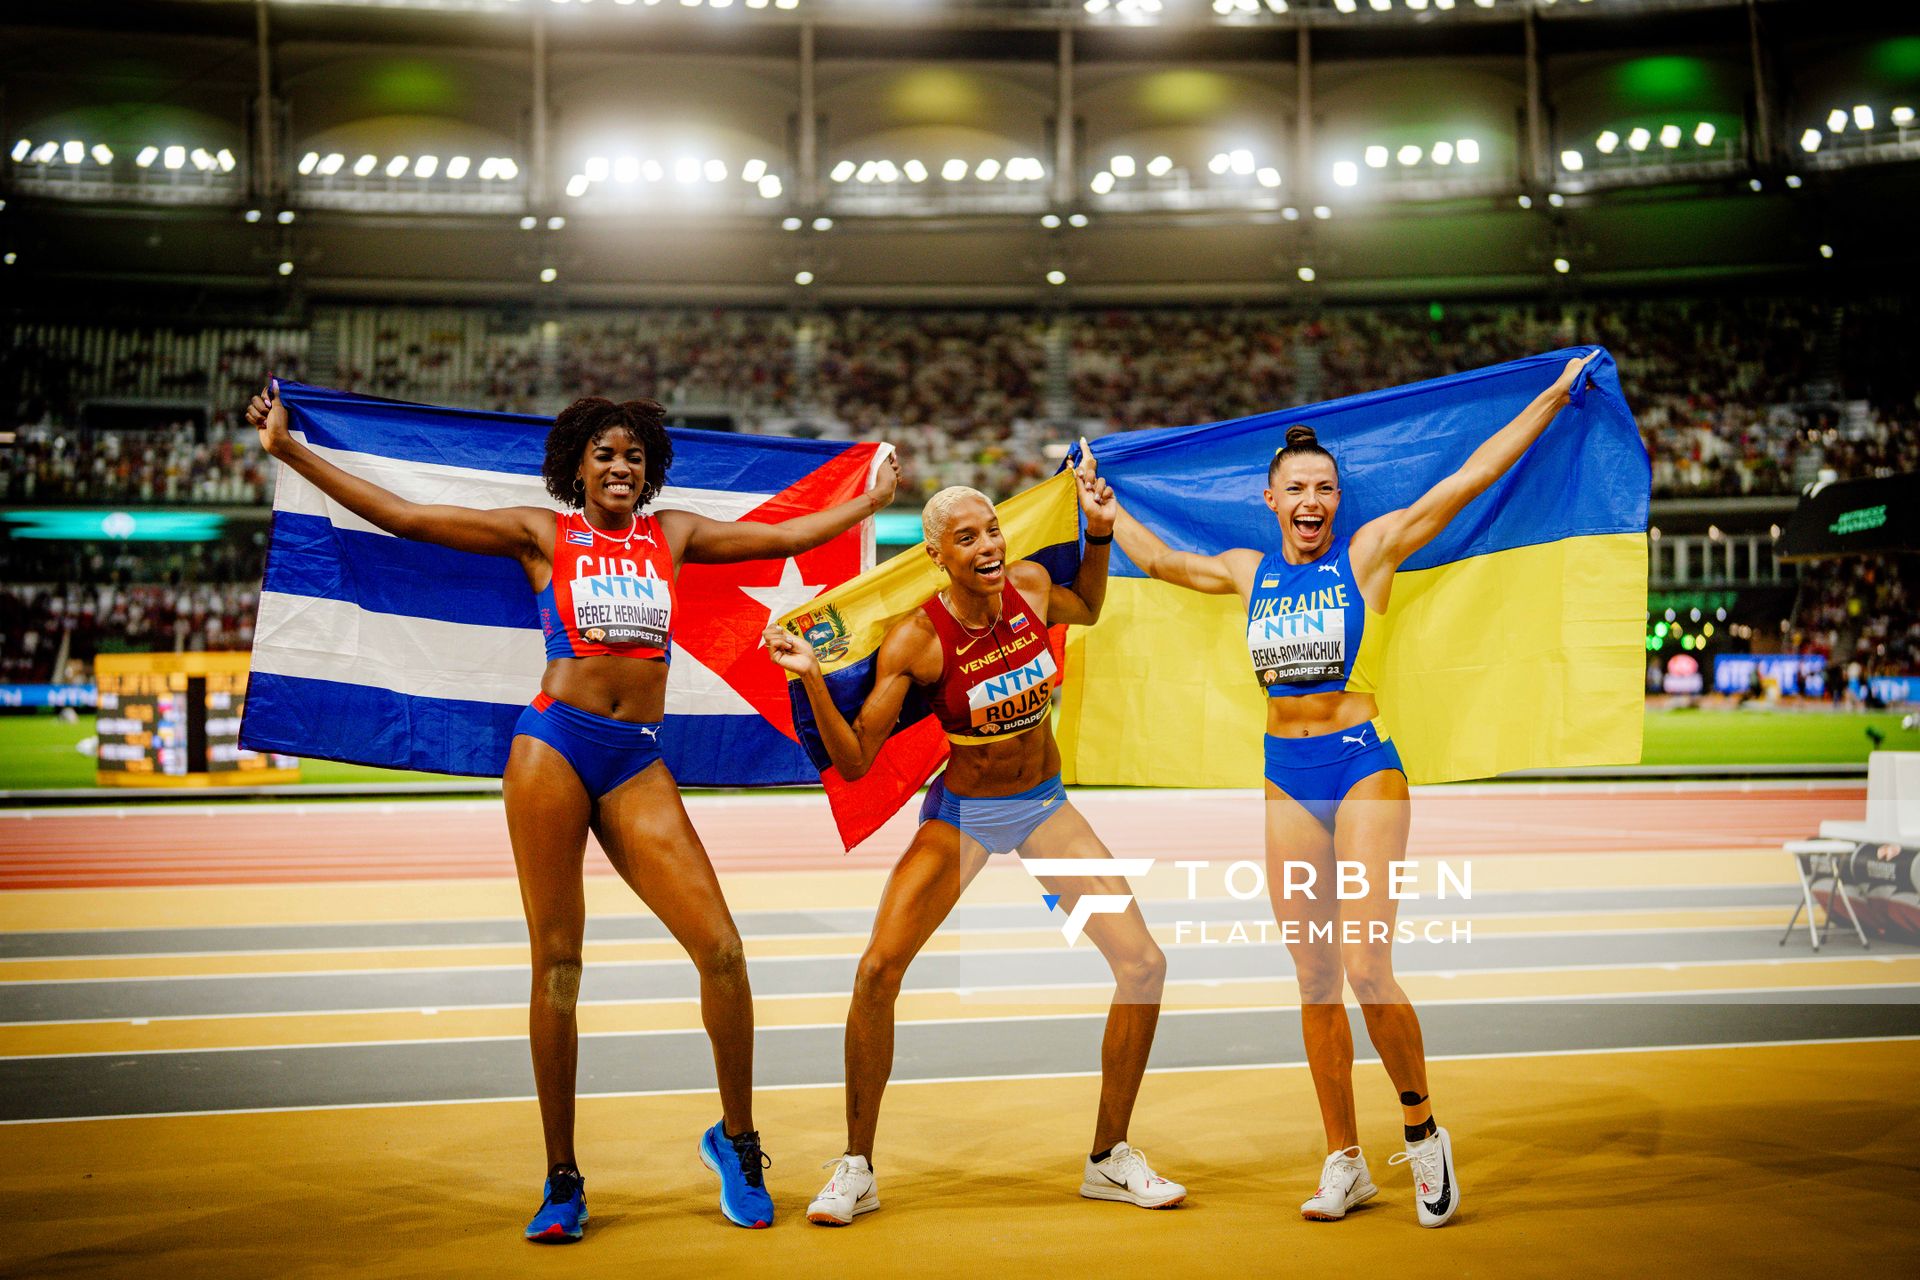 Leyanis Pérez hernández (CUB/Cuba), Yulimar Rojas (VEN/Venezuela), Maryna Bekh-romanchuk (UKR/Ukraine) during the Long Jump Final on Day 7 of the World Athletics Championships Budapest 23 at the National Athletics Centre in Budapest, Hungary on August 25, 2023.